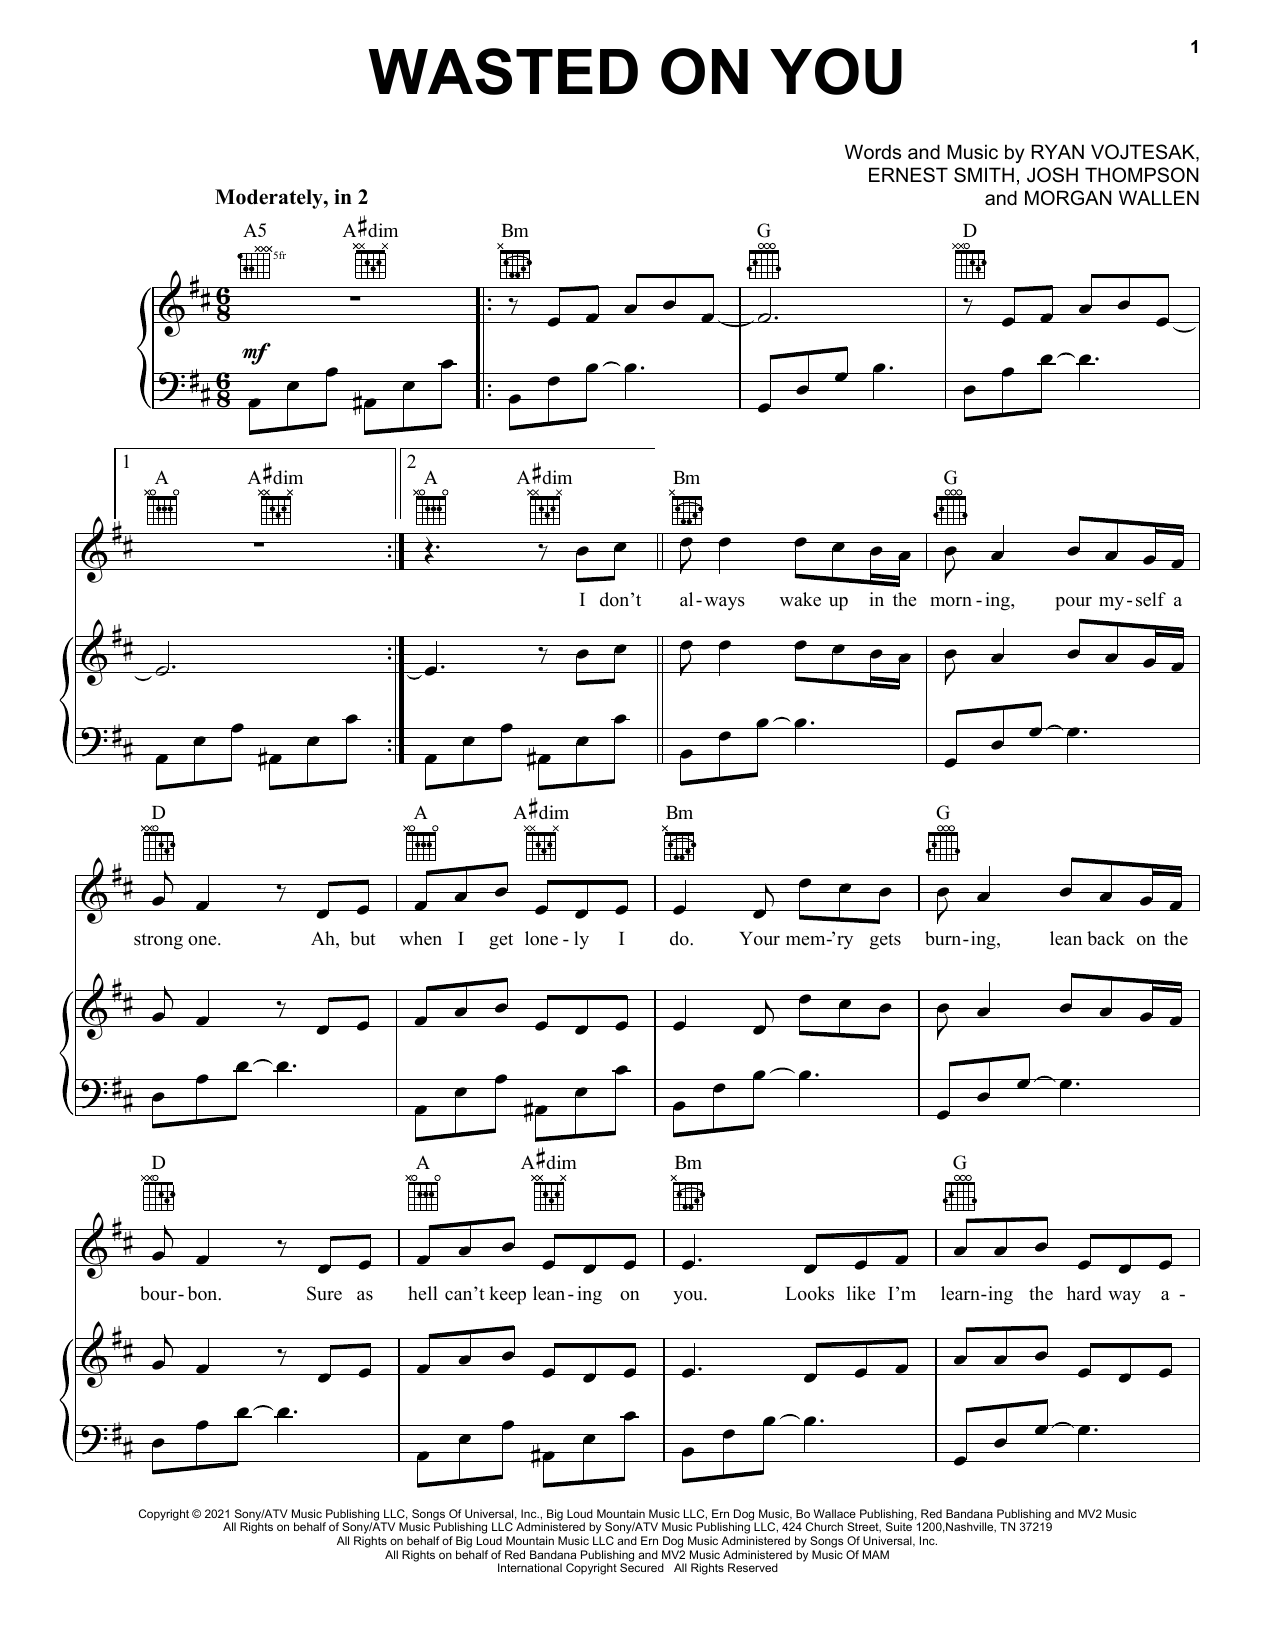 Morgan Wallen Wasted on You Sheet Music